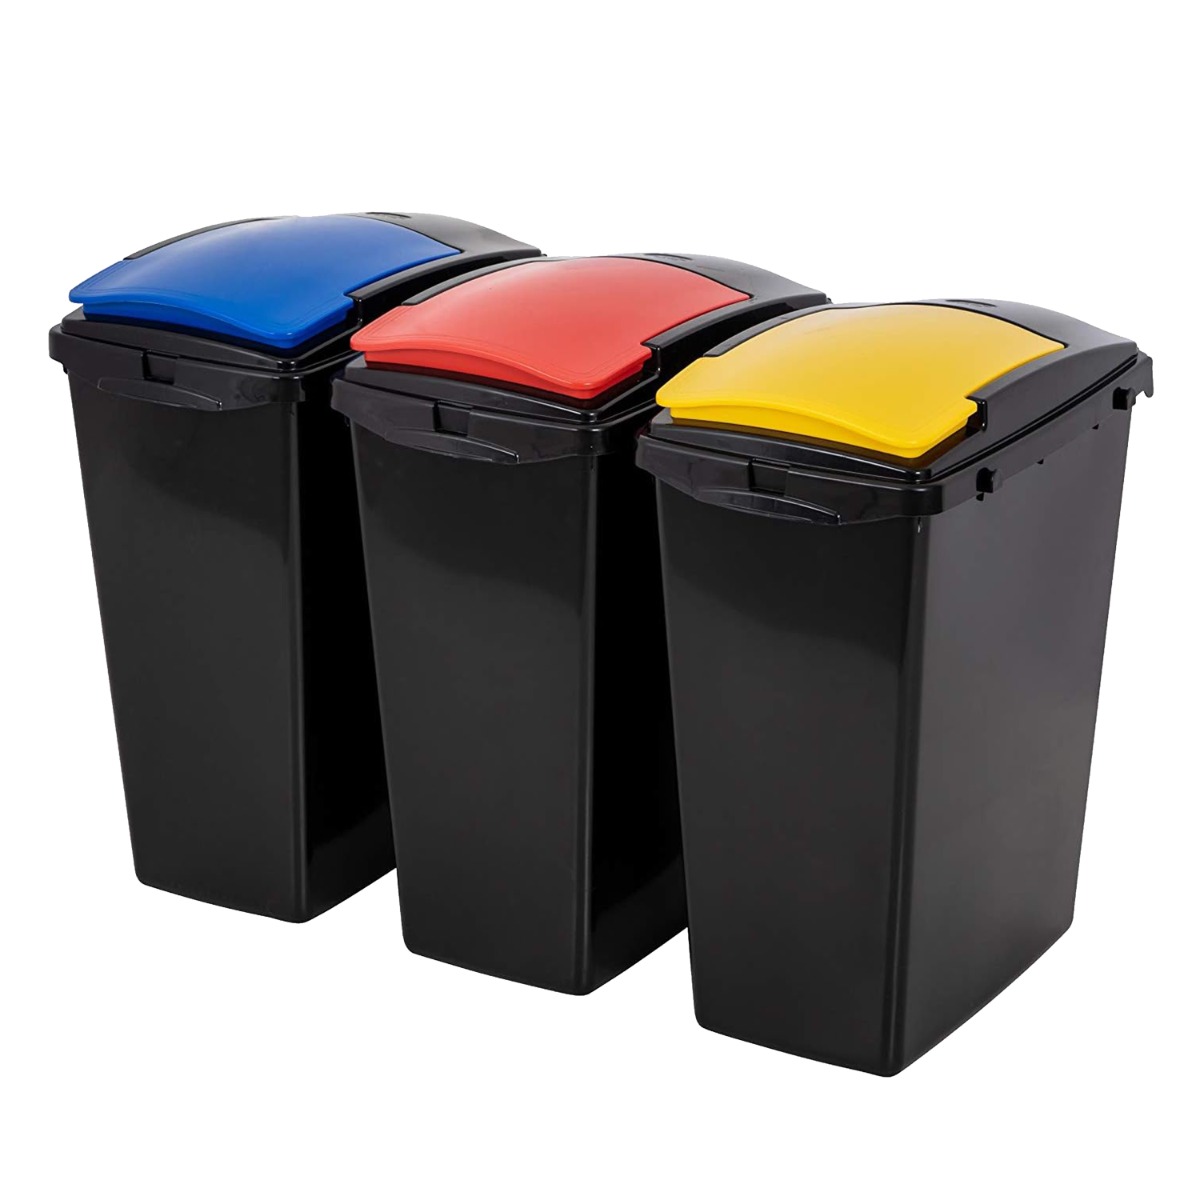 Addis 40L Yellow, Red & Blue Recycling Bins - Set of 3